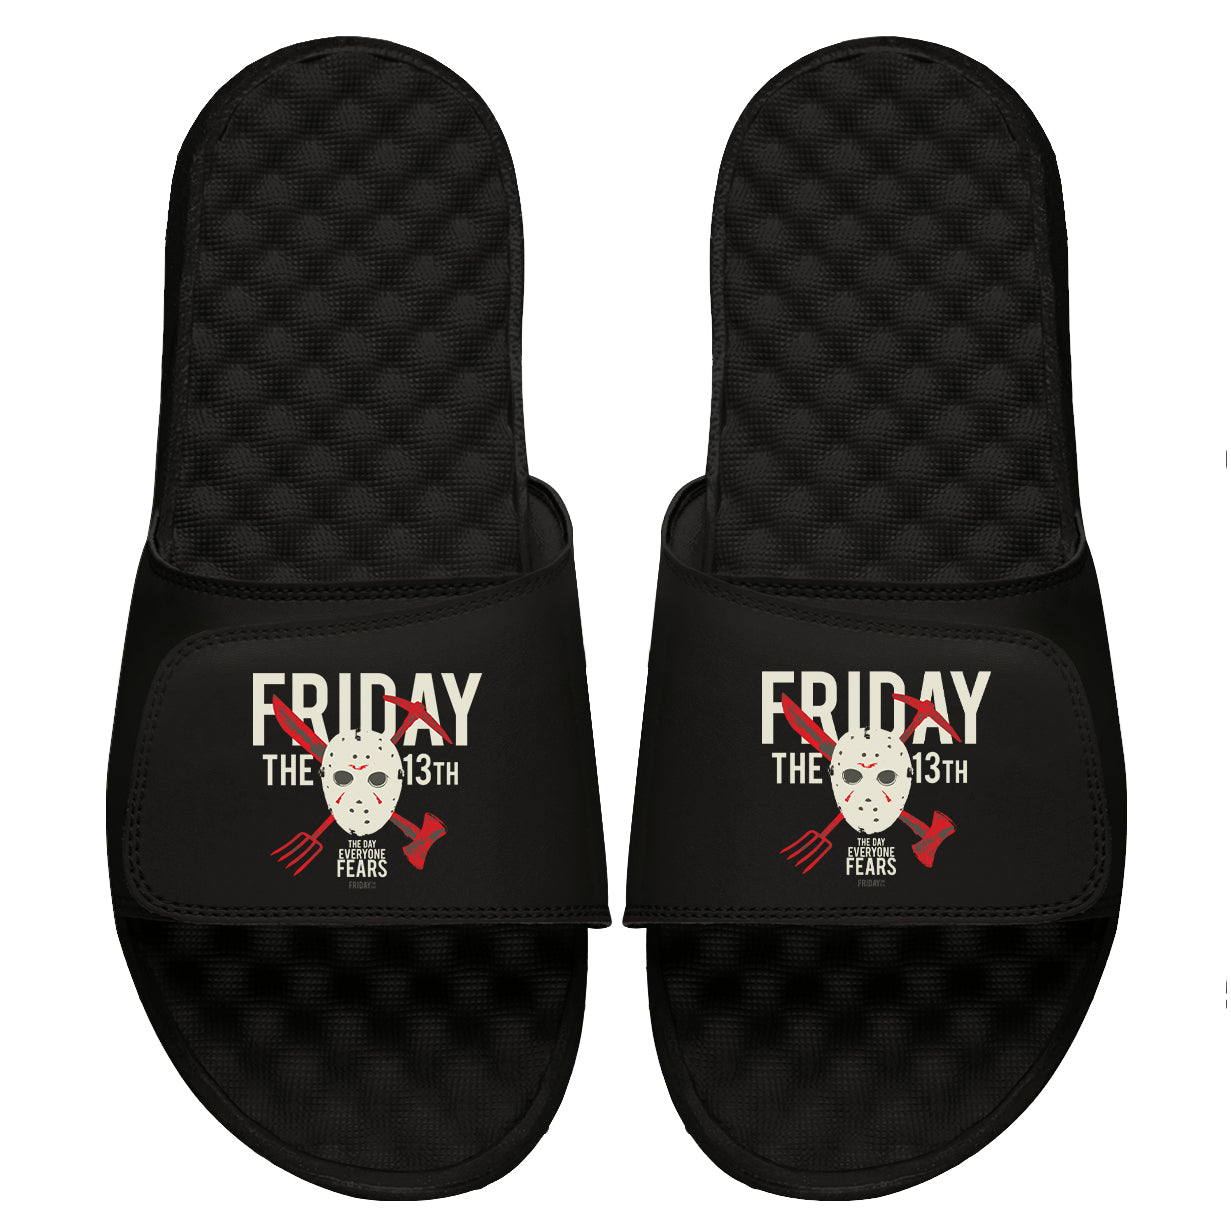 Friday The 13th: Day Of Fear Slides